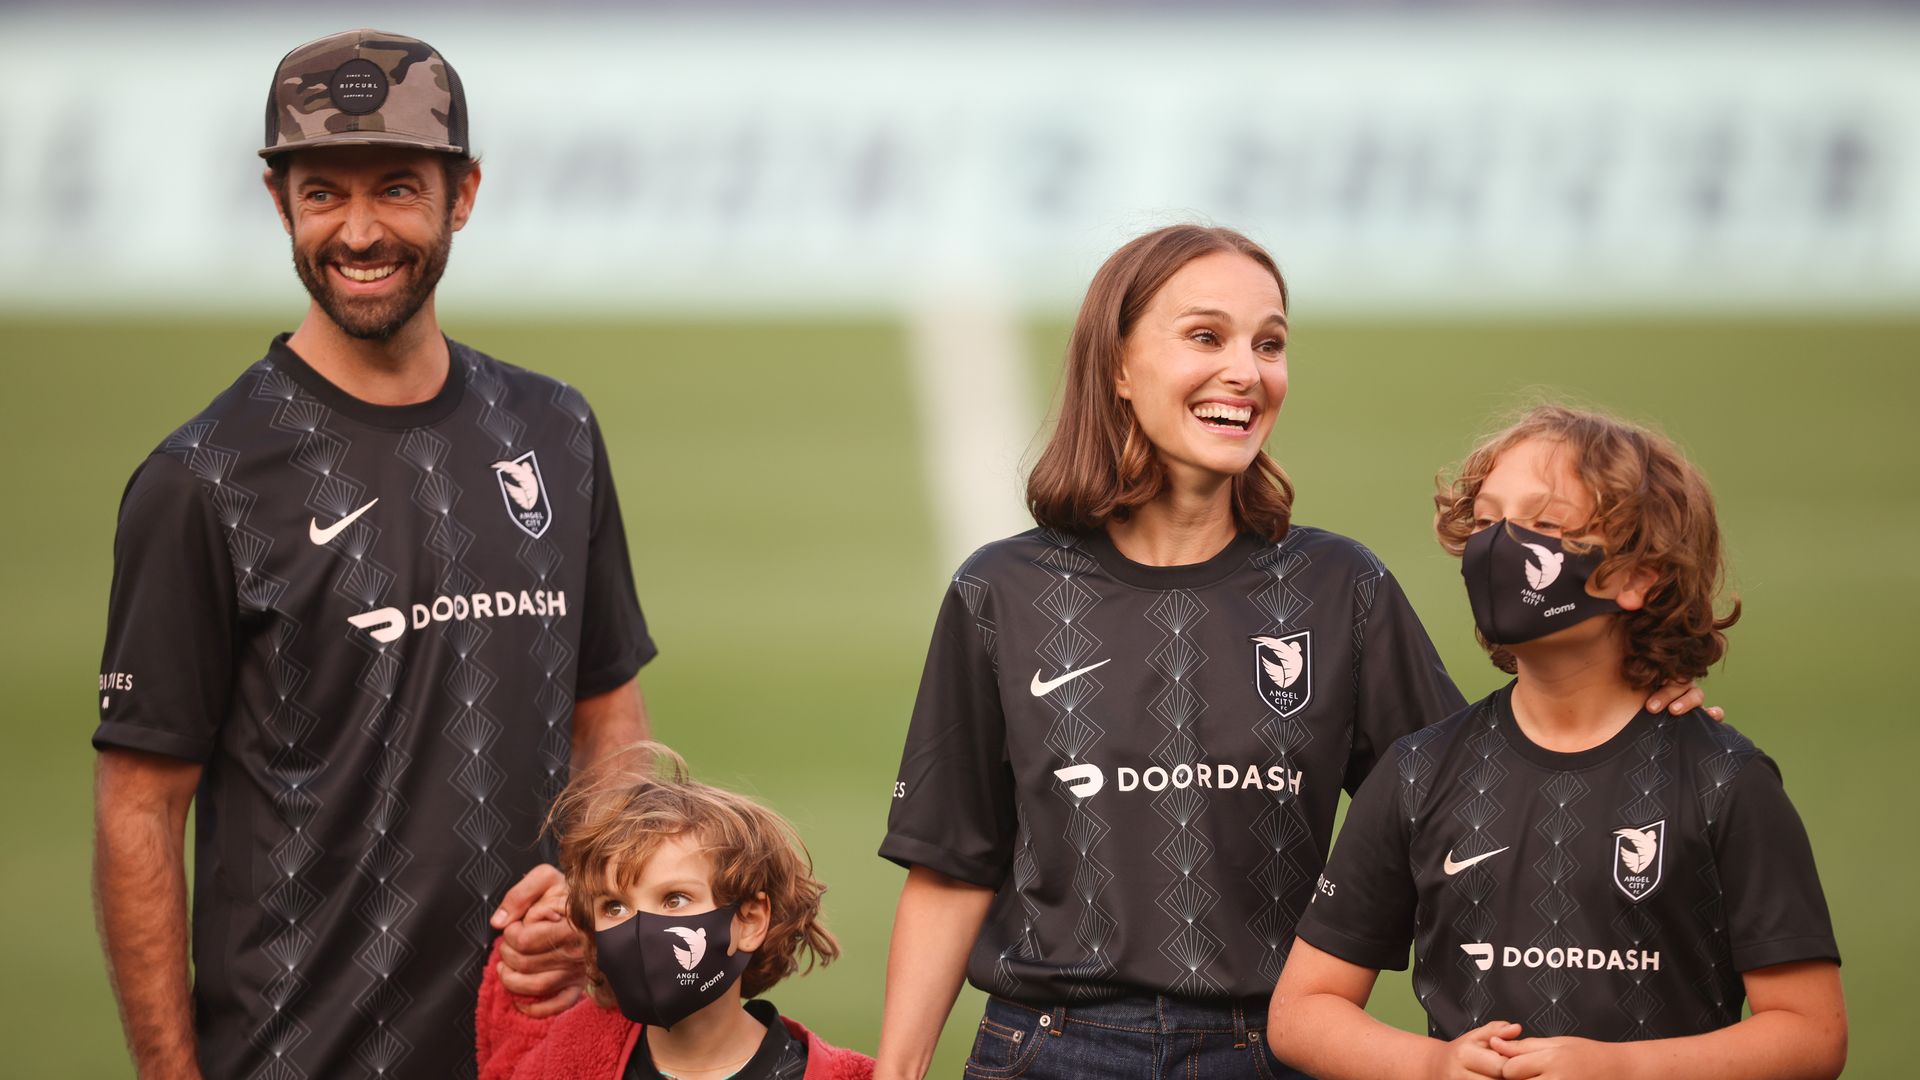 Angel City FC Founder Natalie Portman and her family performs the coin toss before a game between San Diego Wave FC and Angel City FC at Titan Stadium on March 19, 2022 in Fullerton, California